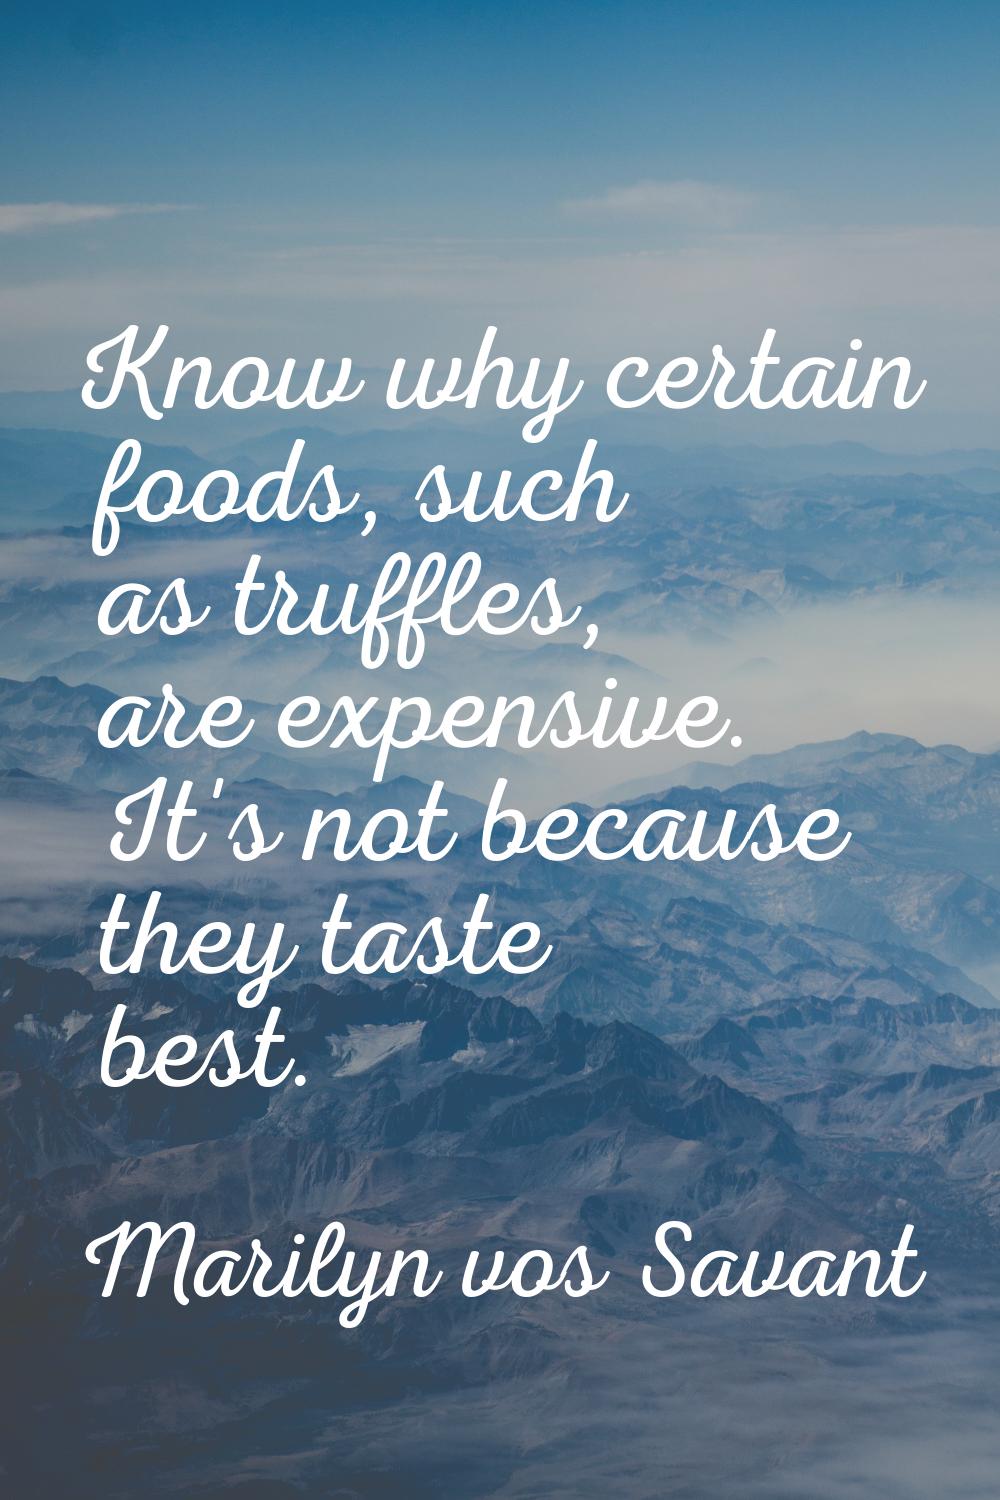 Know why certain foods, such as truffles, are expensive. It's not because they taste best.